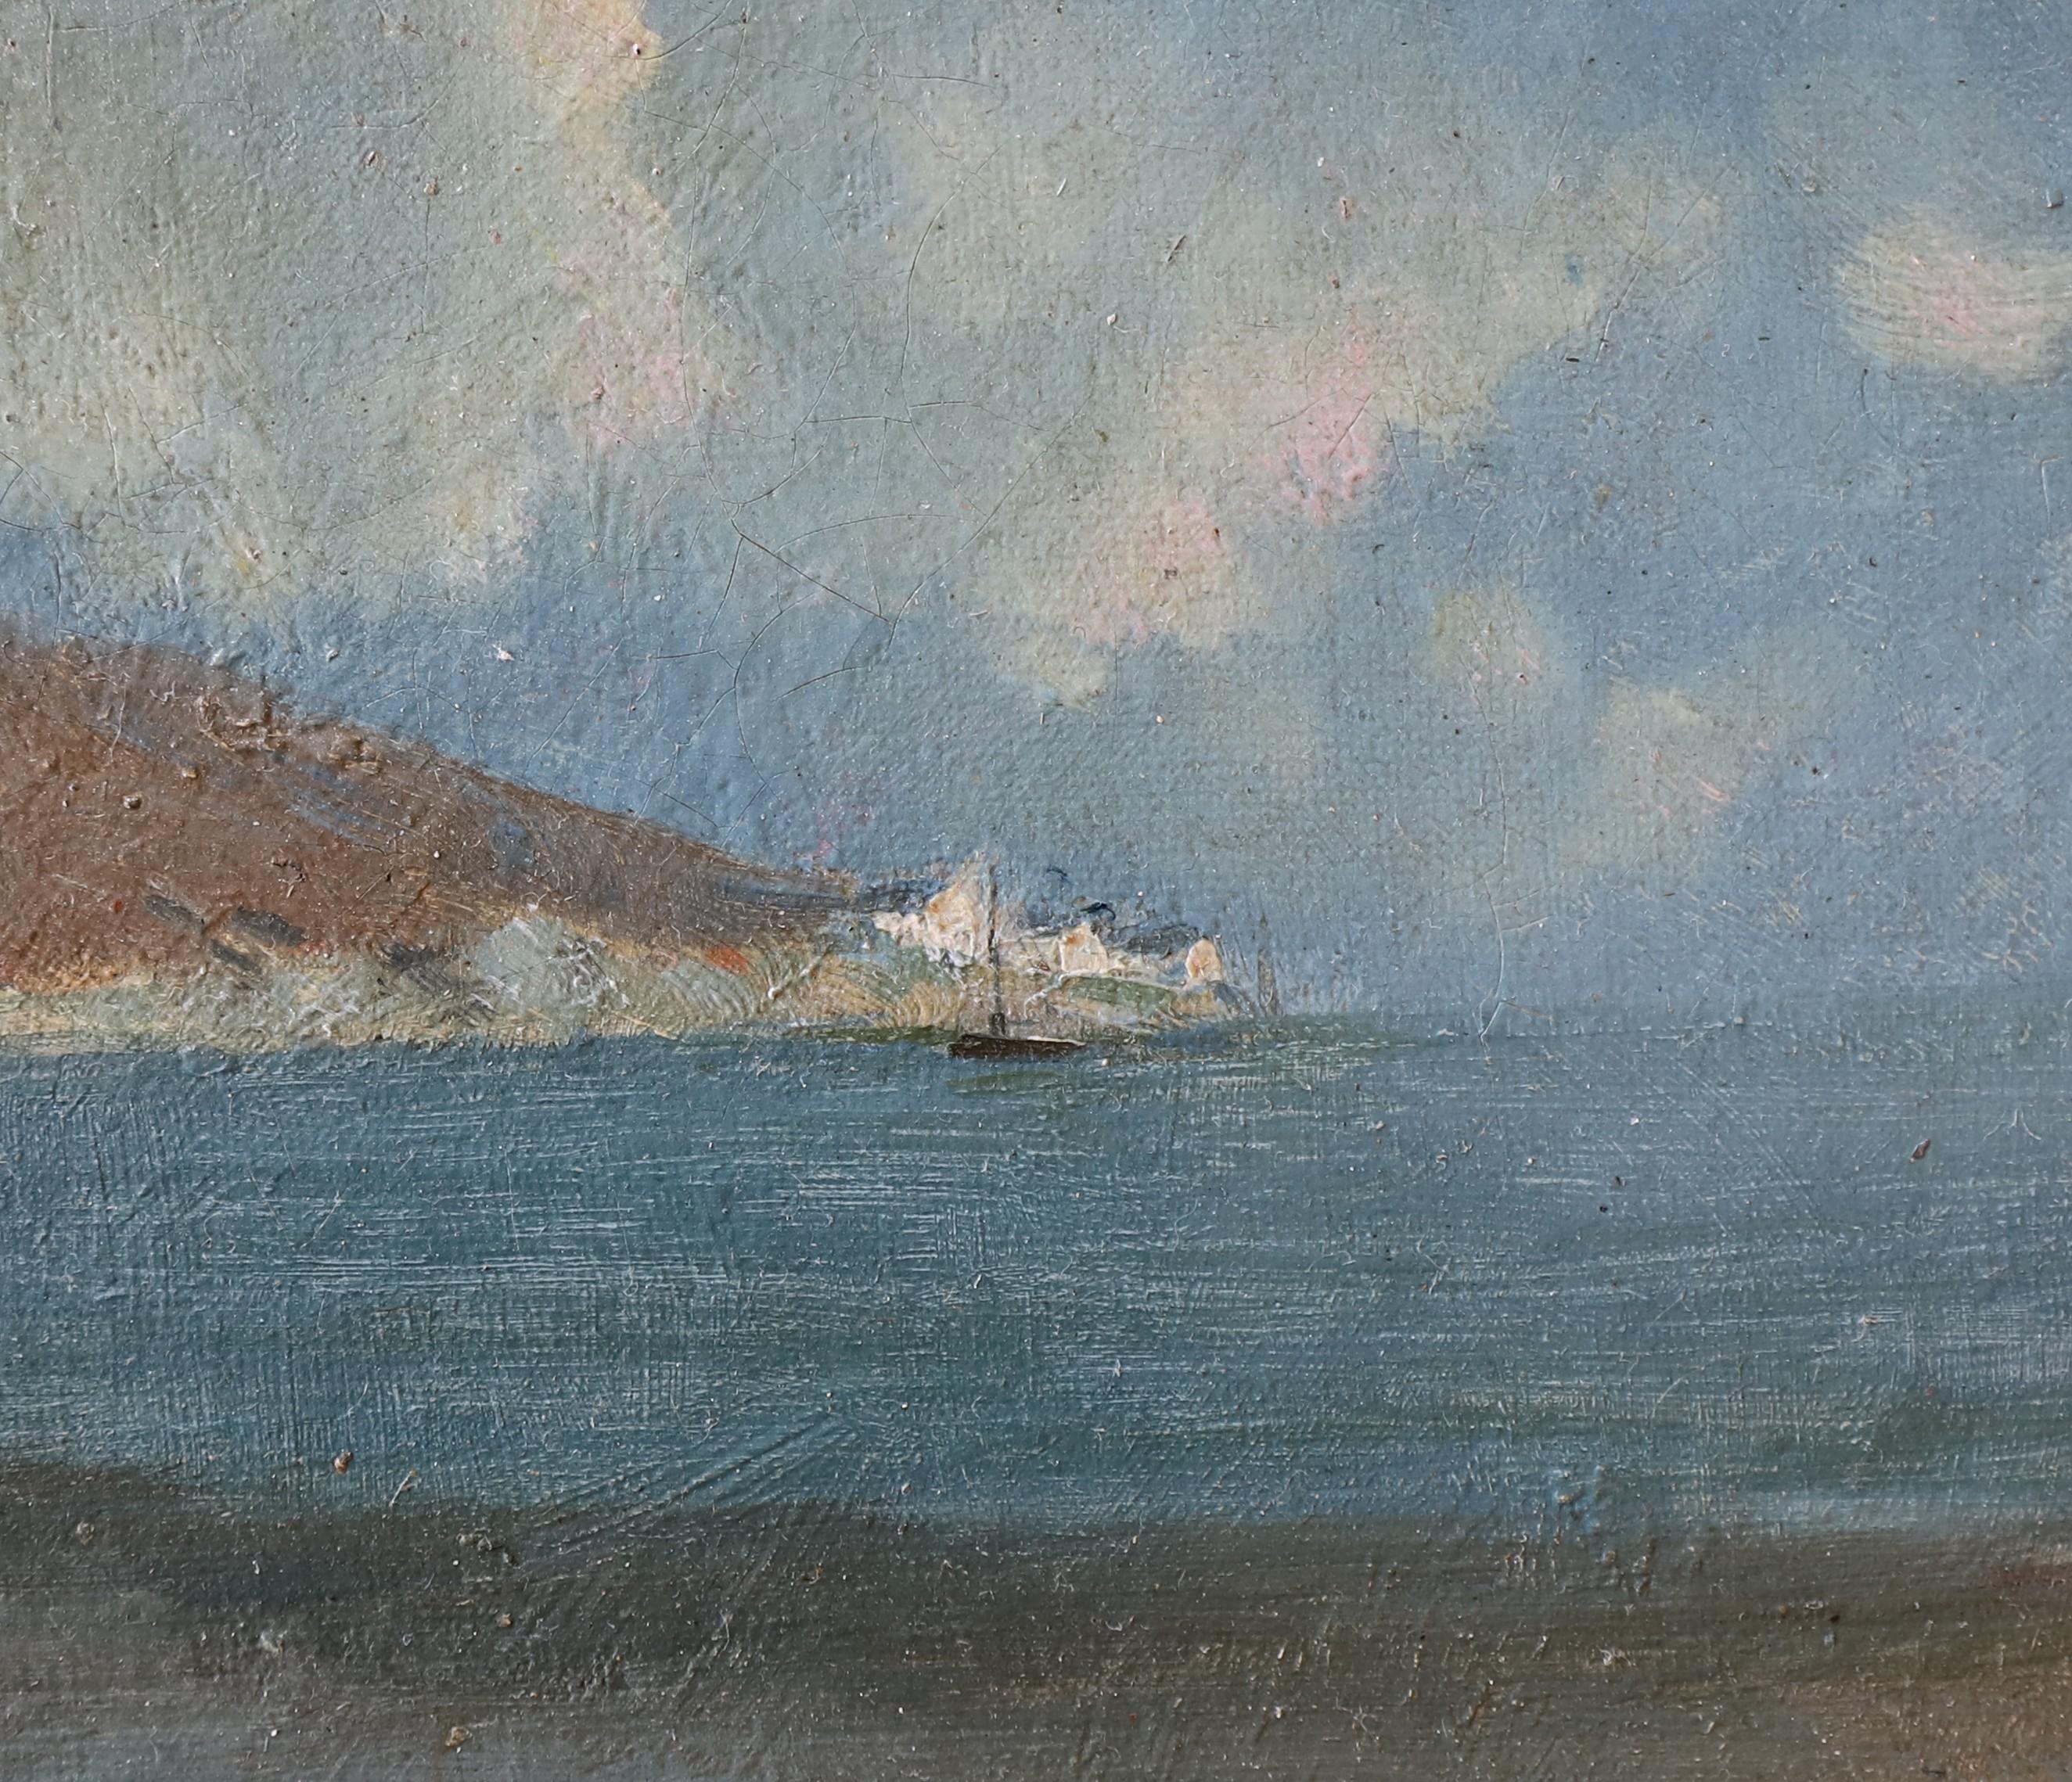 San Francisco Bay near Golden Gate, 1893 by William Hubaeck, California Painting - Gray Landscape Painting by William Hubacek